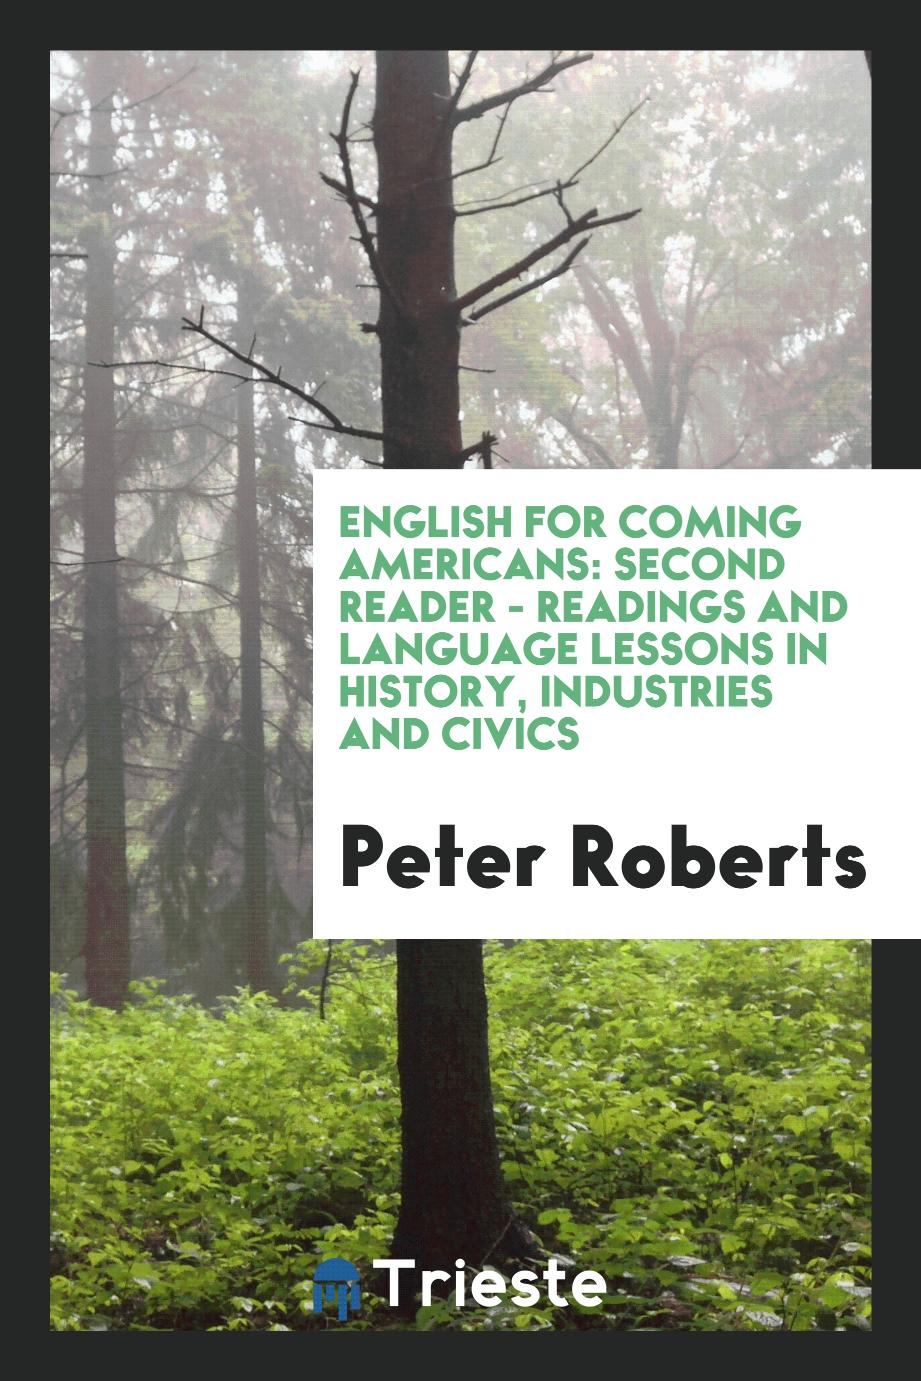 Peter Roberts - English for Coming Americans: Second Reader - Readings and Language Lessons in History, Industries and Civics